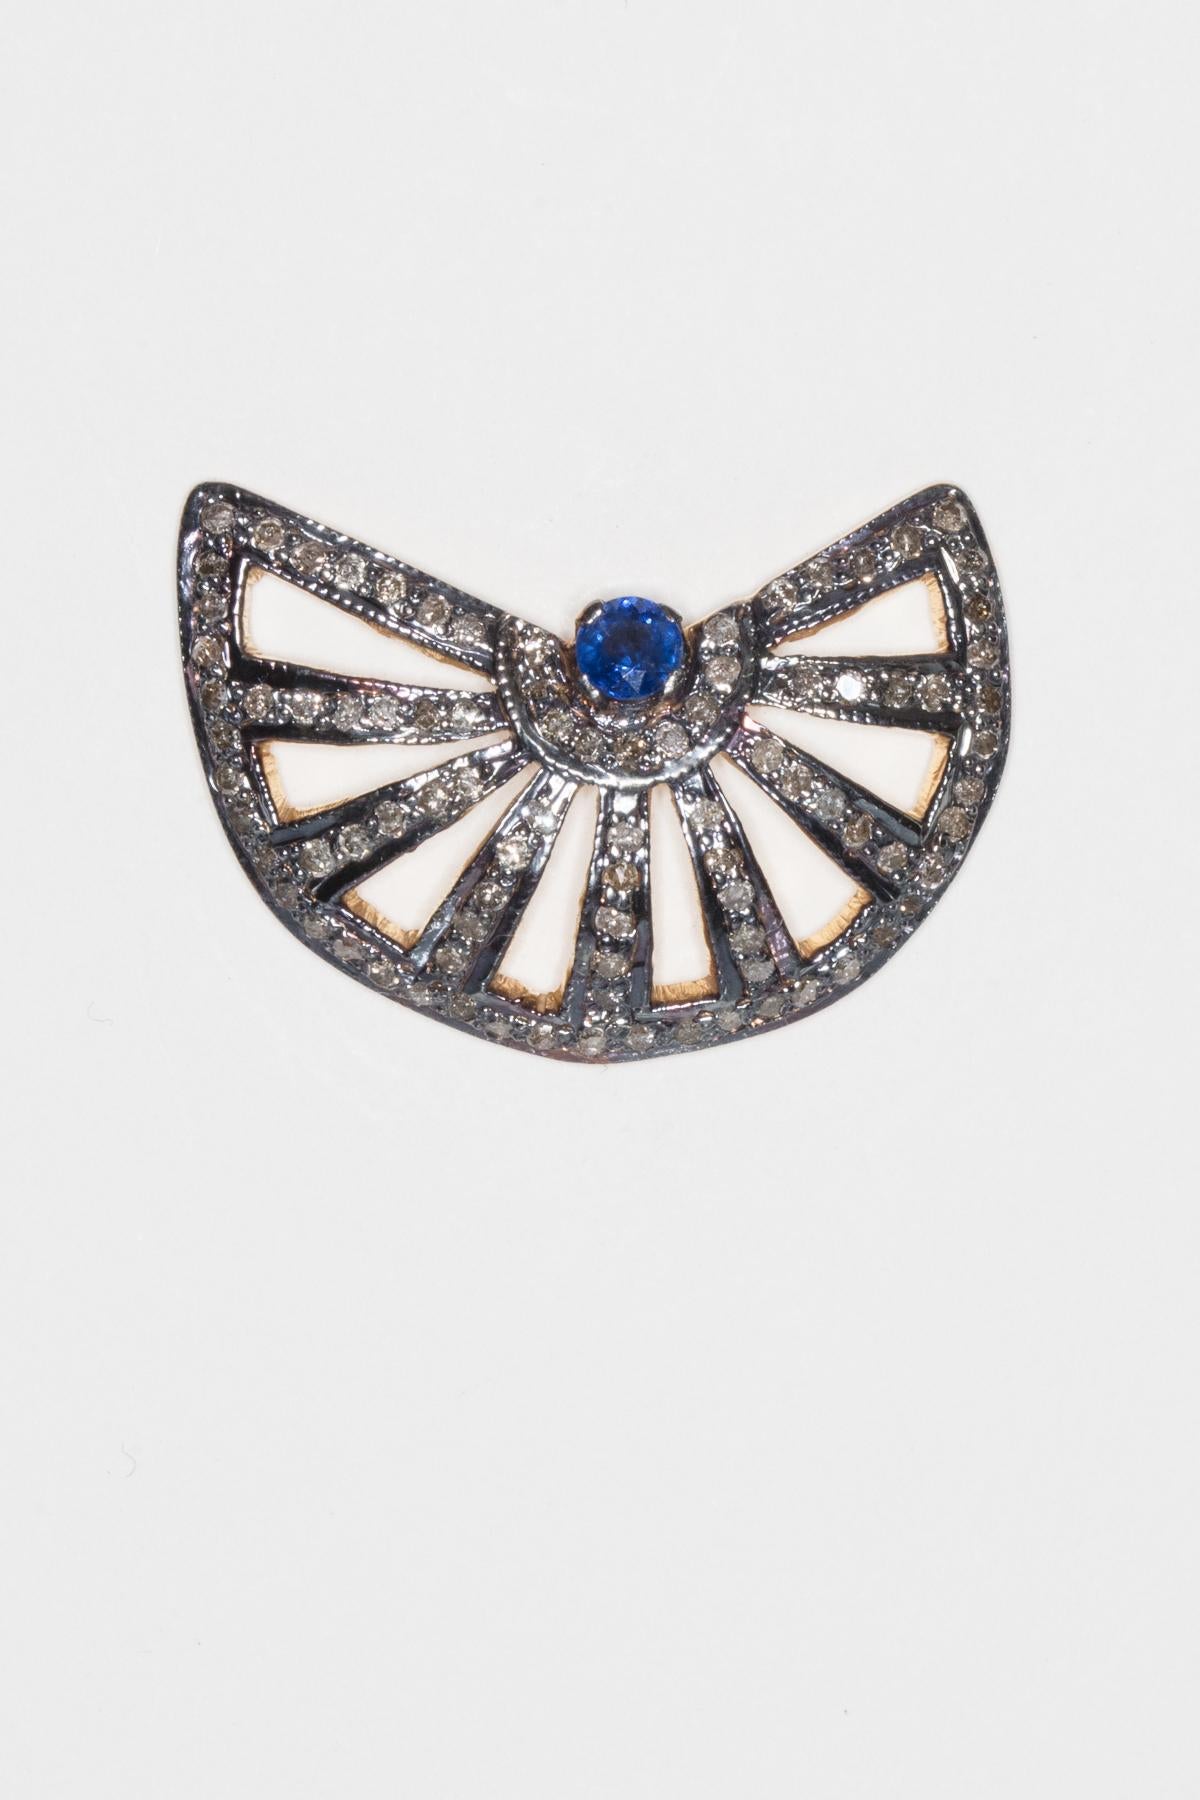 Faceted blue sapphire at center of fan-shaped stud earrings with pave`-set diamonds.  Set in oxidized sterling silver with 18K gold post for pierced ears.  Sapphires are .87 carats, diamonds are 1.71 carats.